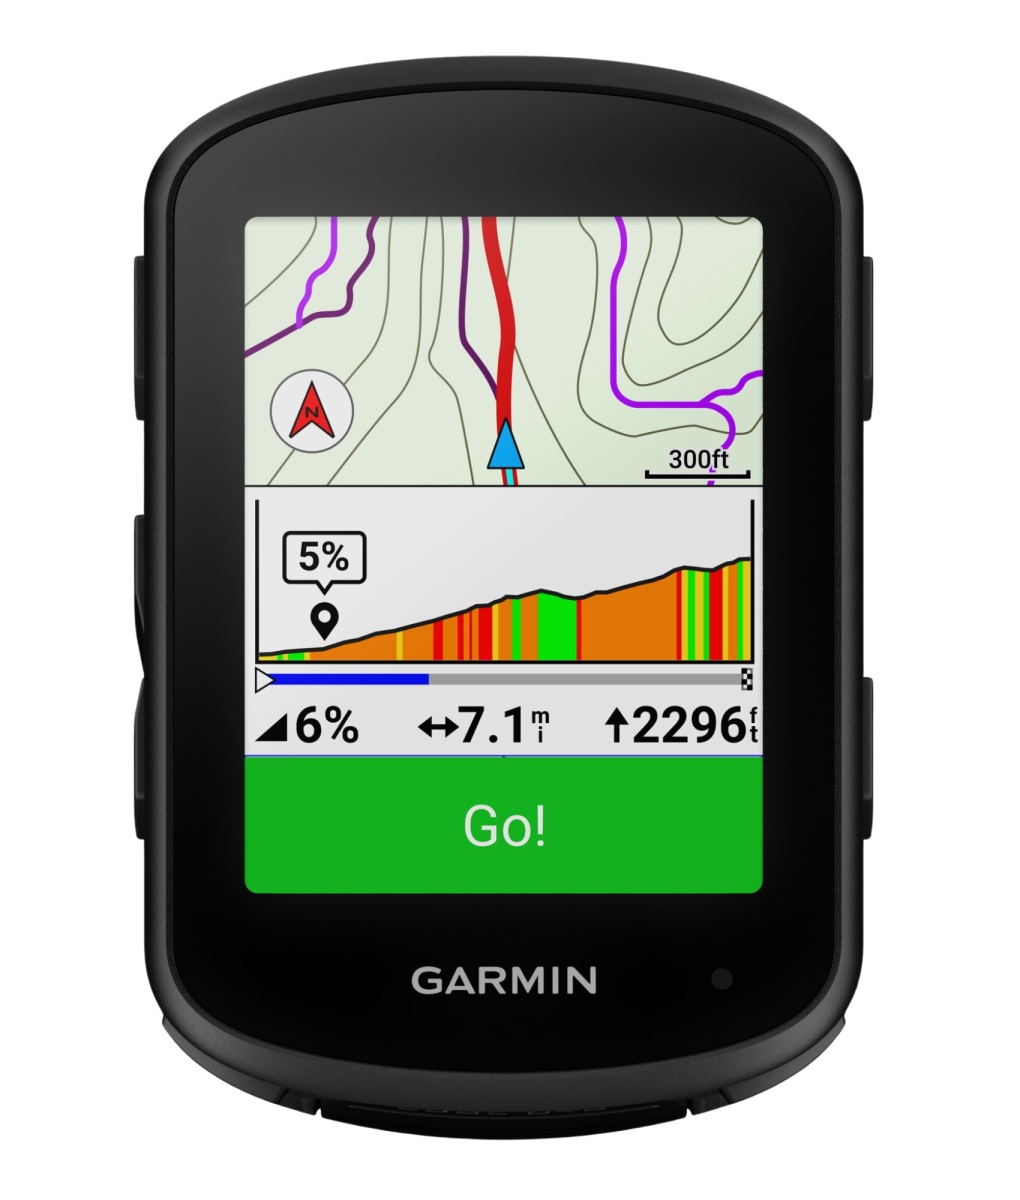 What Is the Activity Class Measurement in Garmin Connect?